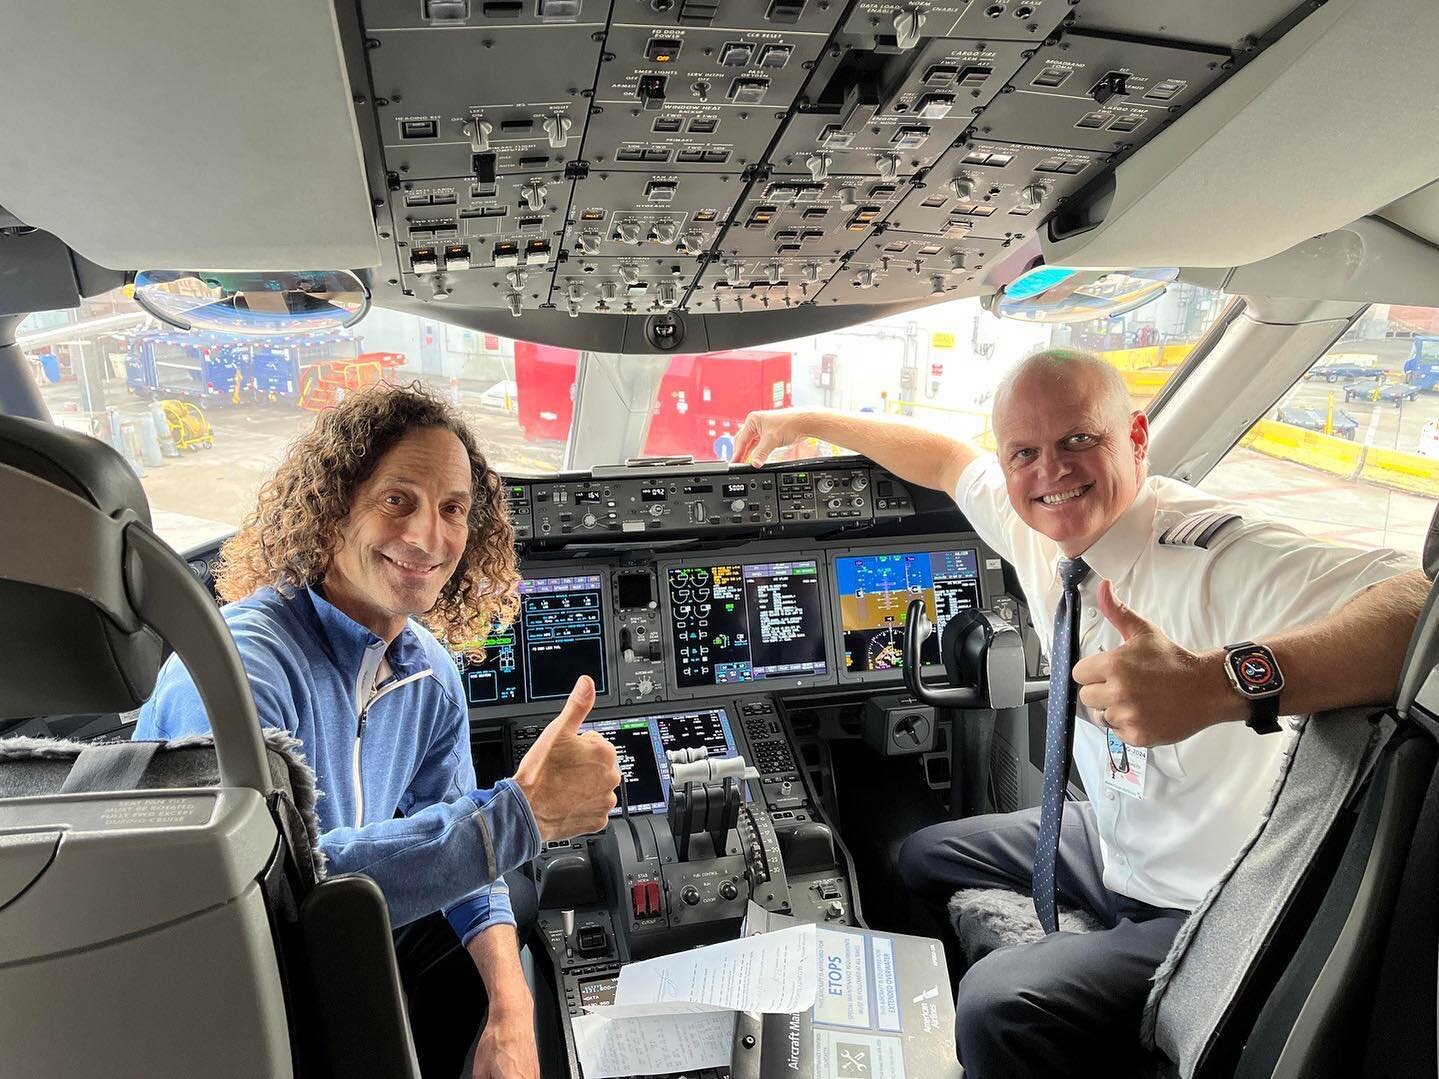 After finishing a great tour of South America, I got to sit in the captain's seat with first officer Brett Walsh on my @americanair flight back from Rio de Janeiro! No, I didn&rsquo;t actually fly the airplane! Just sharing to highlight how cool it i